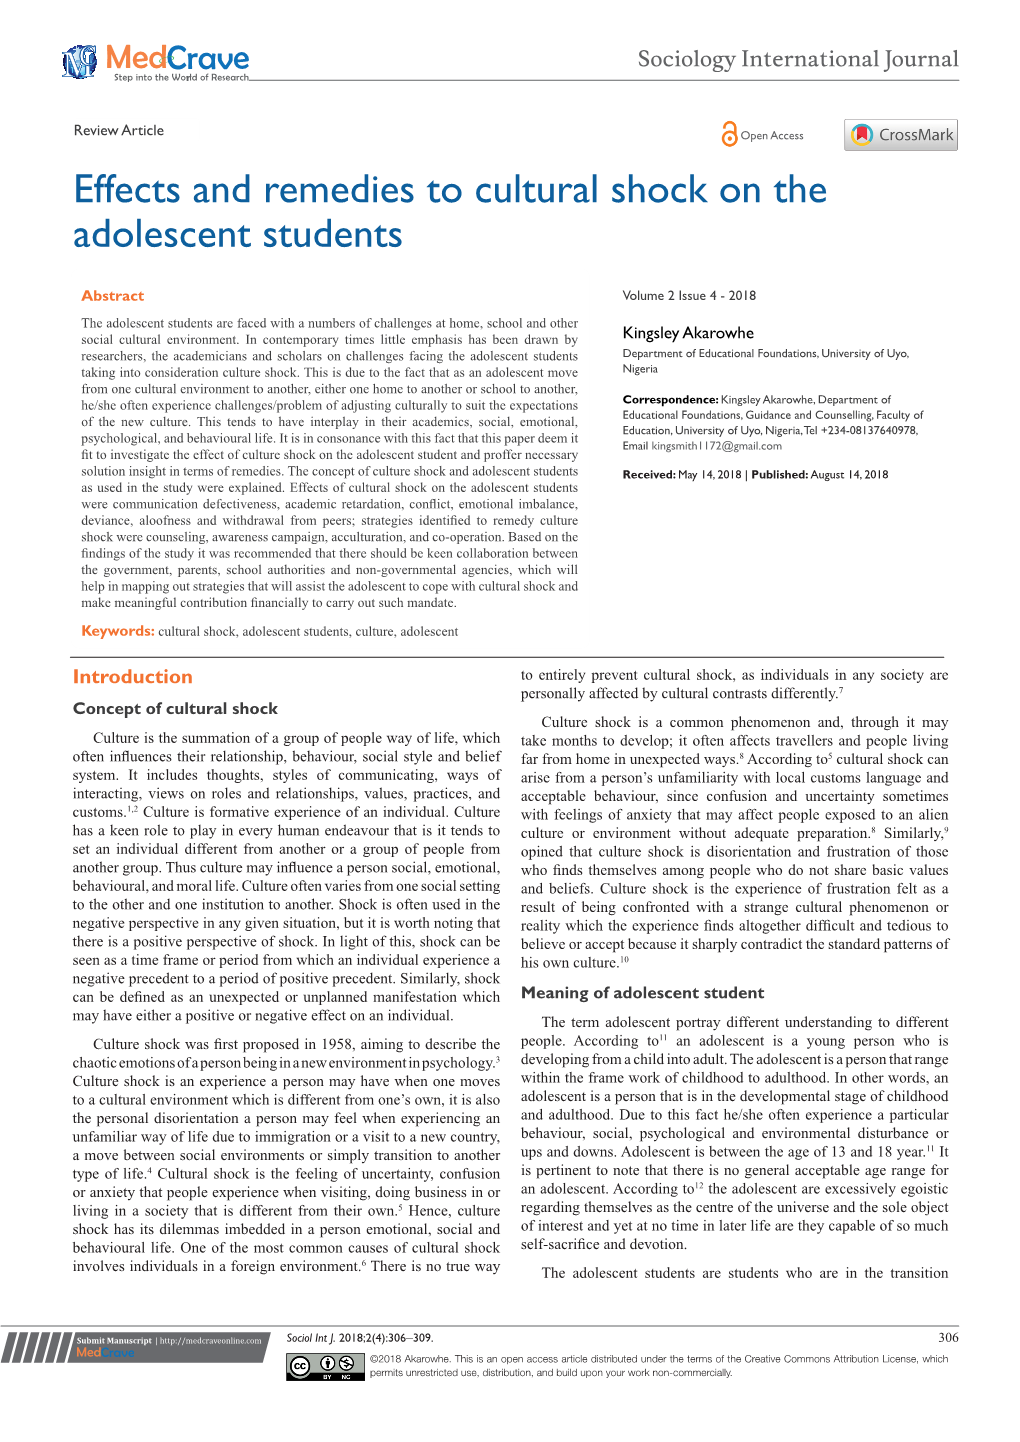 Effects and Remedies to Cultural Shock on the Adolescent Students